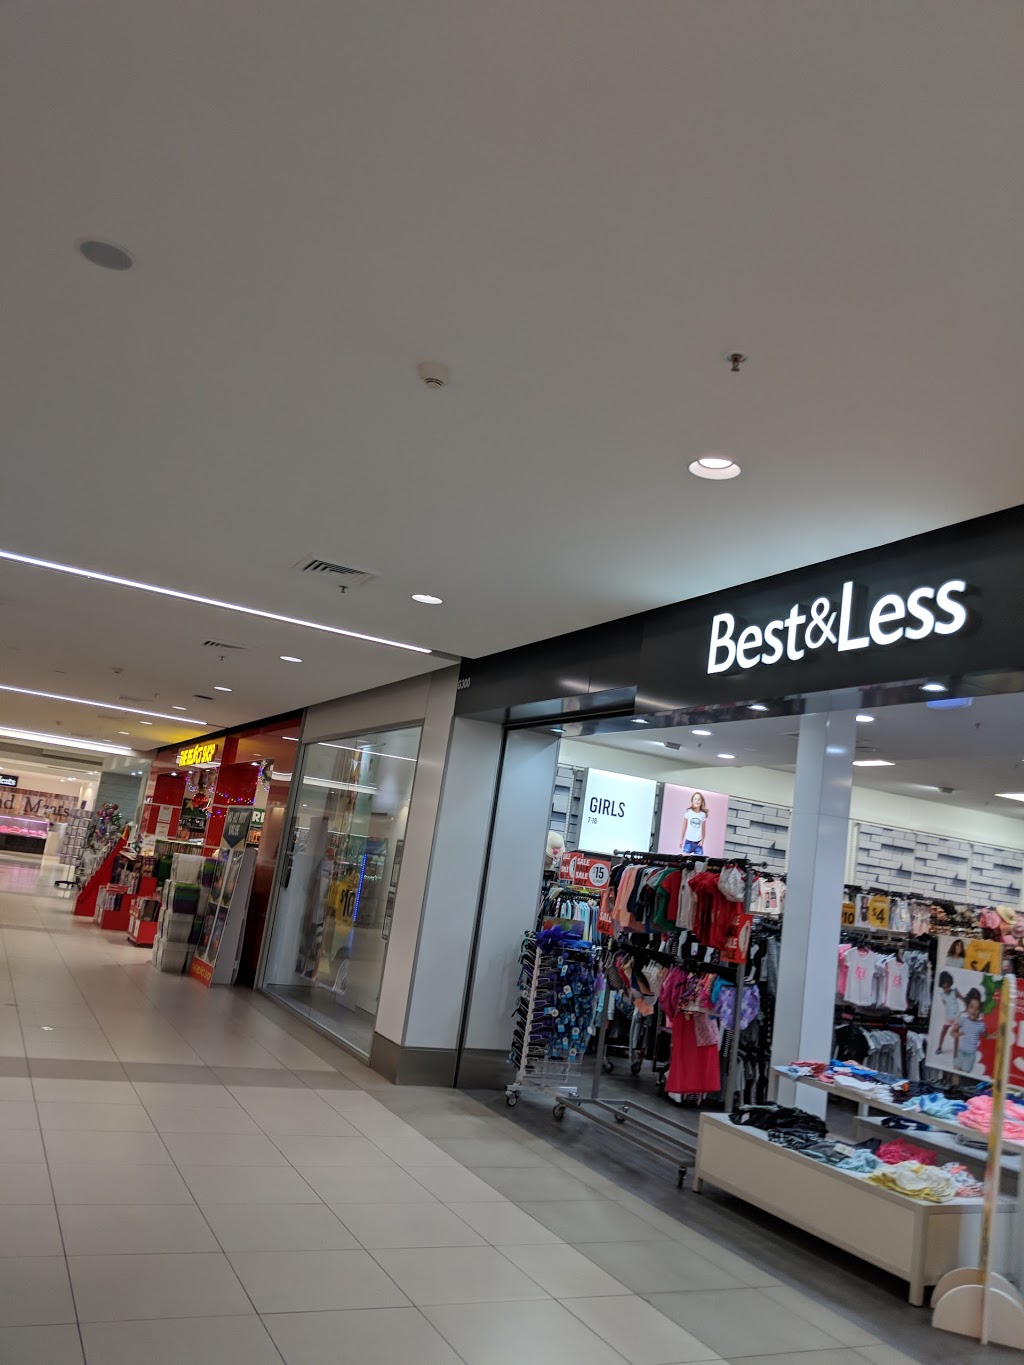 Best&Less | clothing store | G300 Pembroke Rd, Minto NSW 2566, Australia | 0298209377 OR +61 2 9820 9377